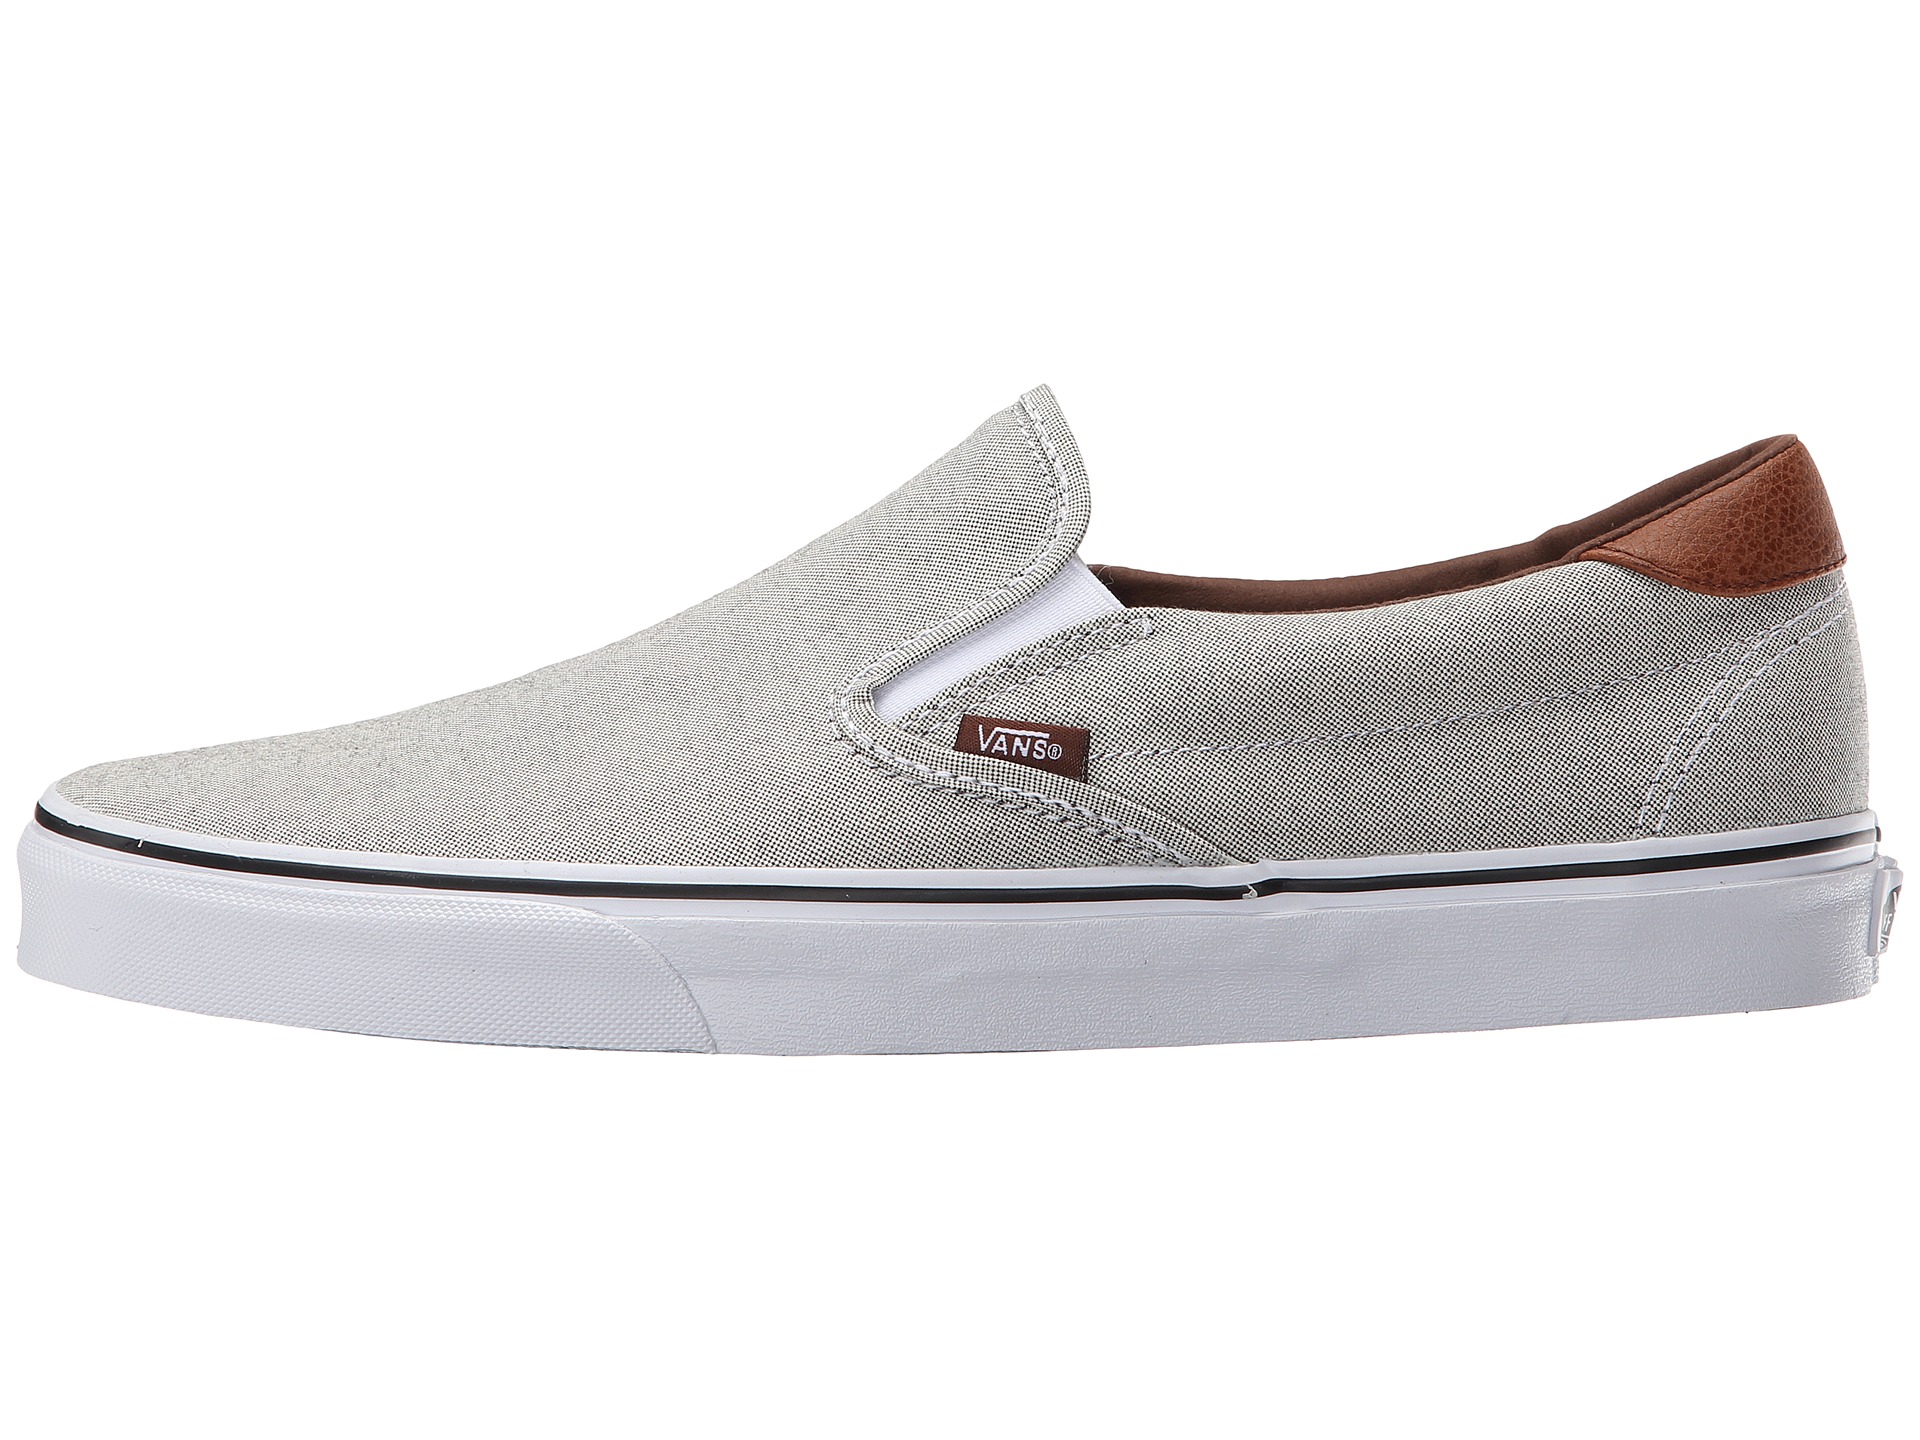 Vans Slip-On 59 (Suiting) Black/True White - Zappos.com Free Shipping ...